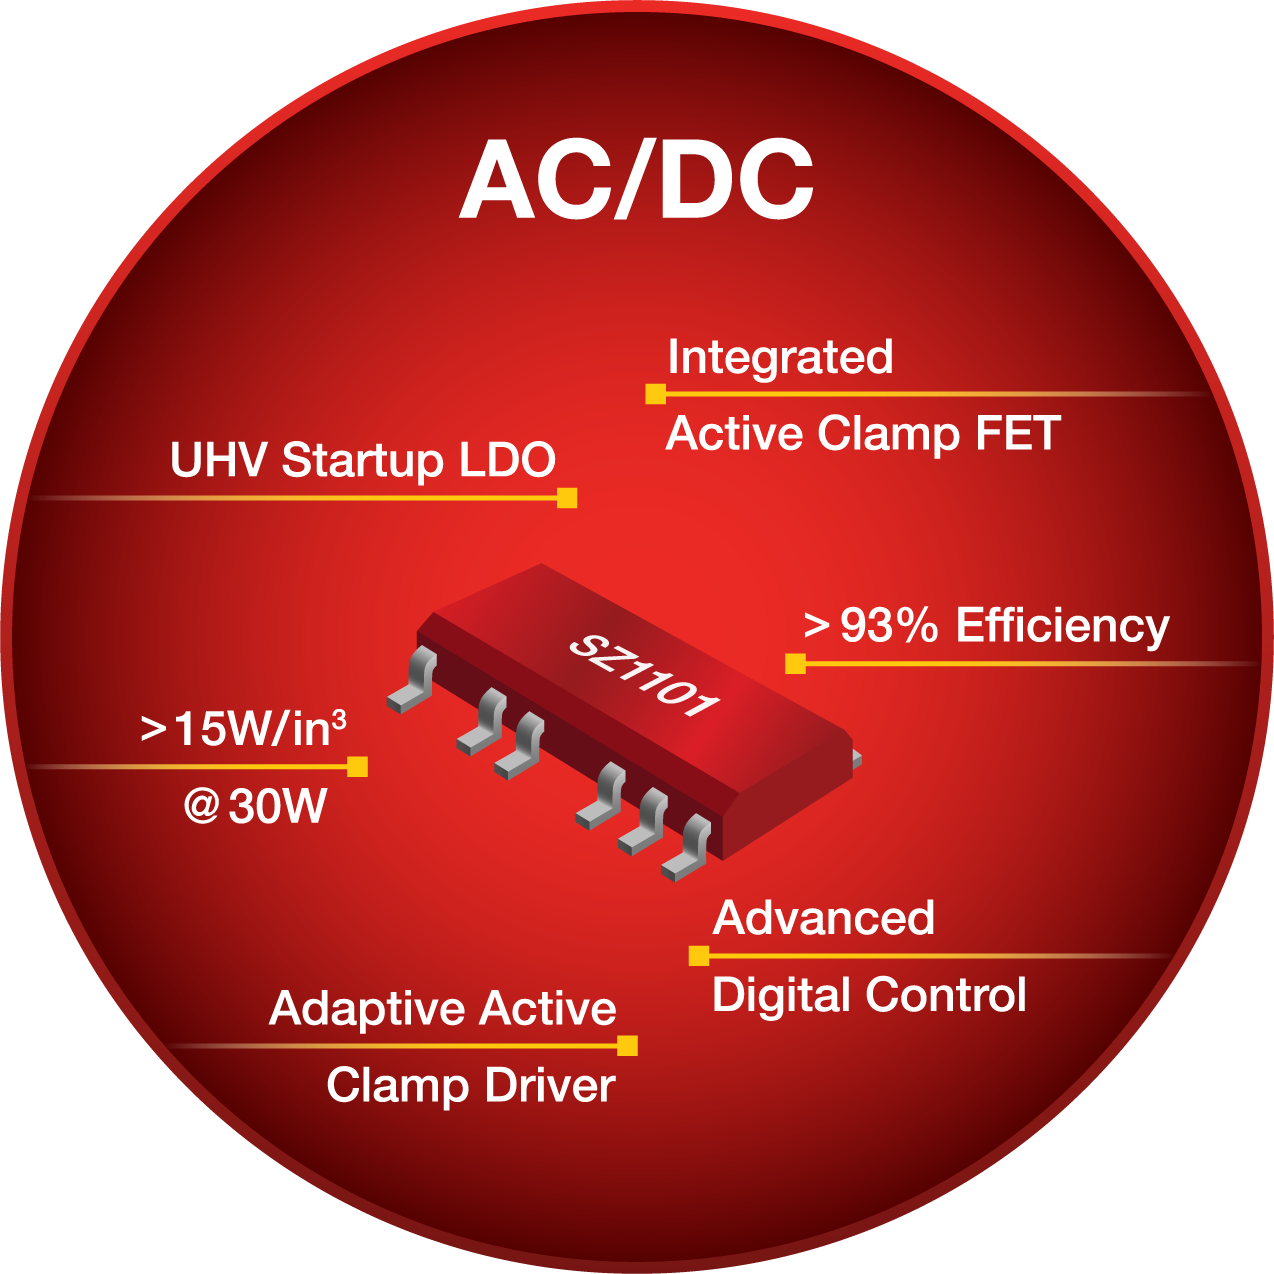 Flyback PWM Controller with integrated active clamp circuit combines design simplicity of flyback controllers with power density enabled by active clamp flyback (ACF) controllers.